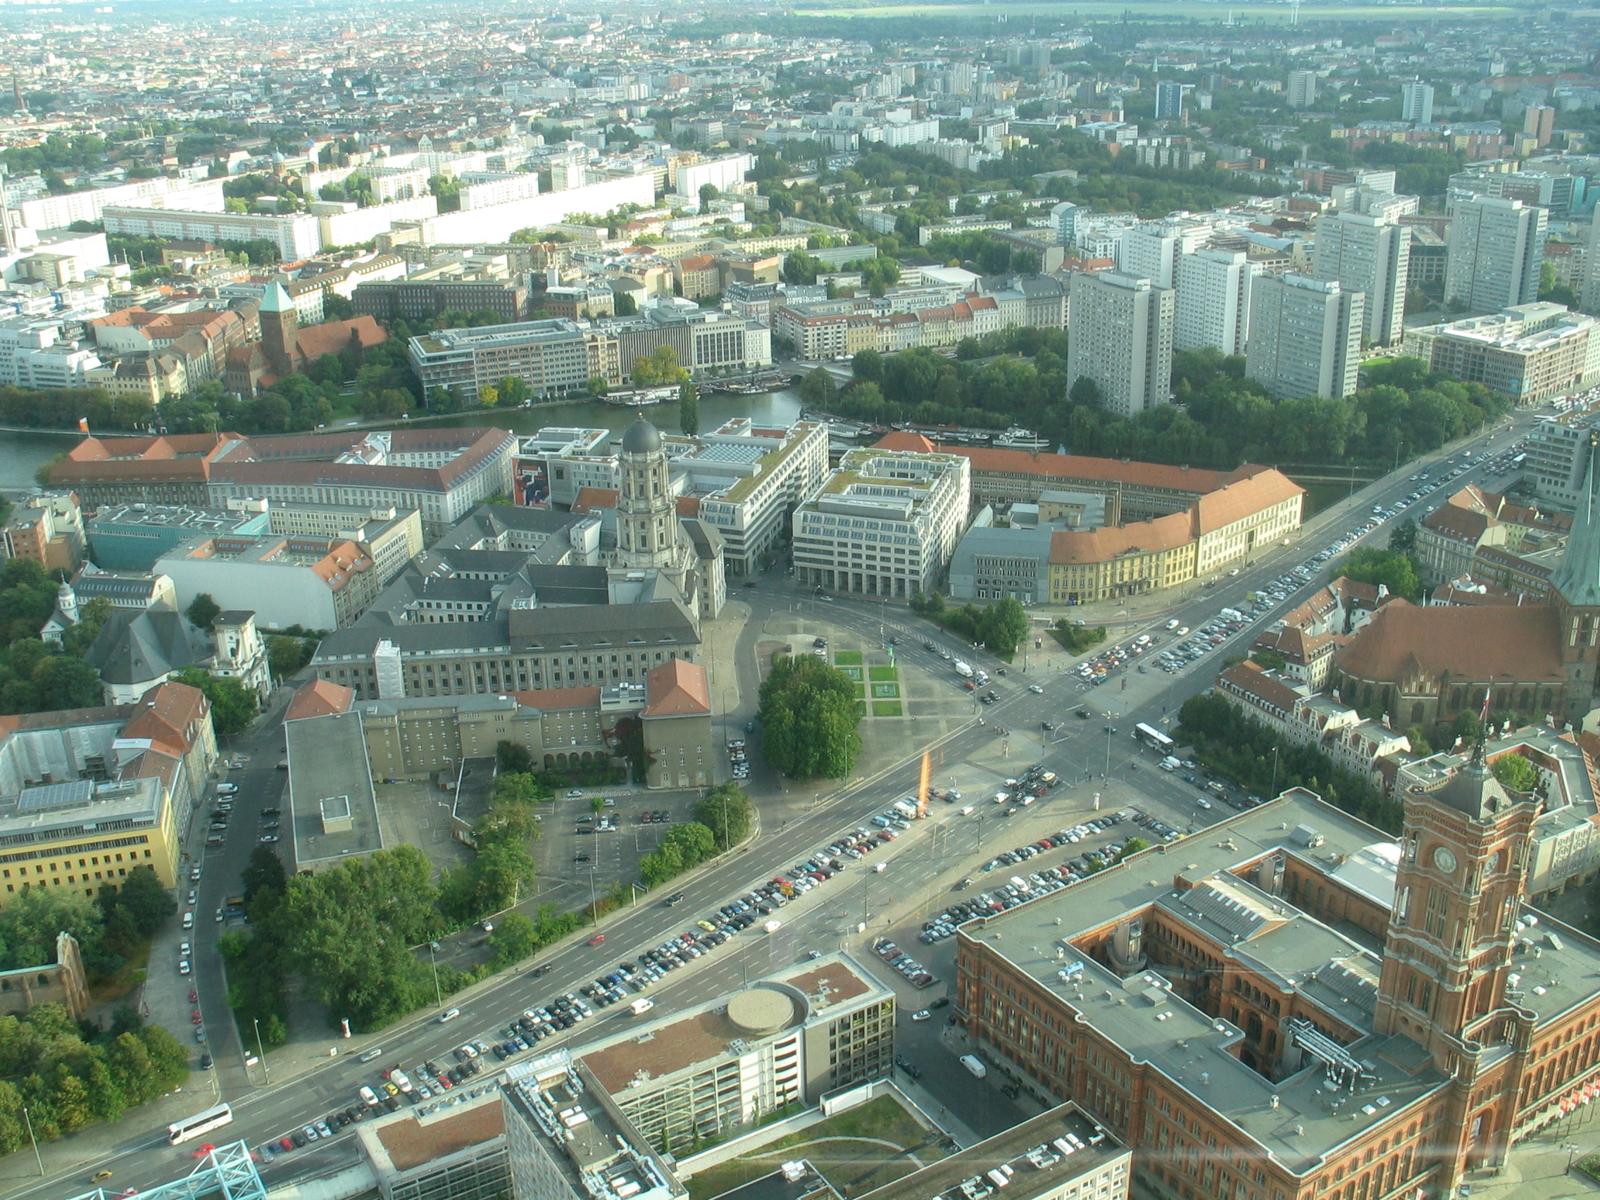 The view from the Fernsehturm